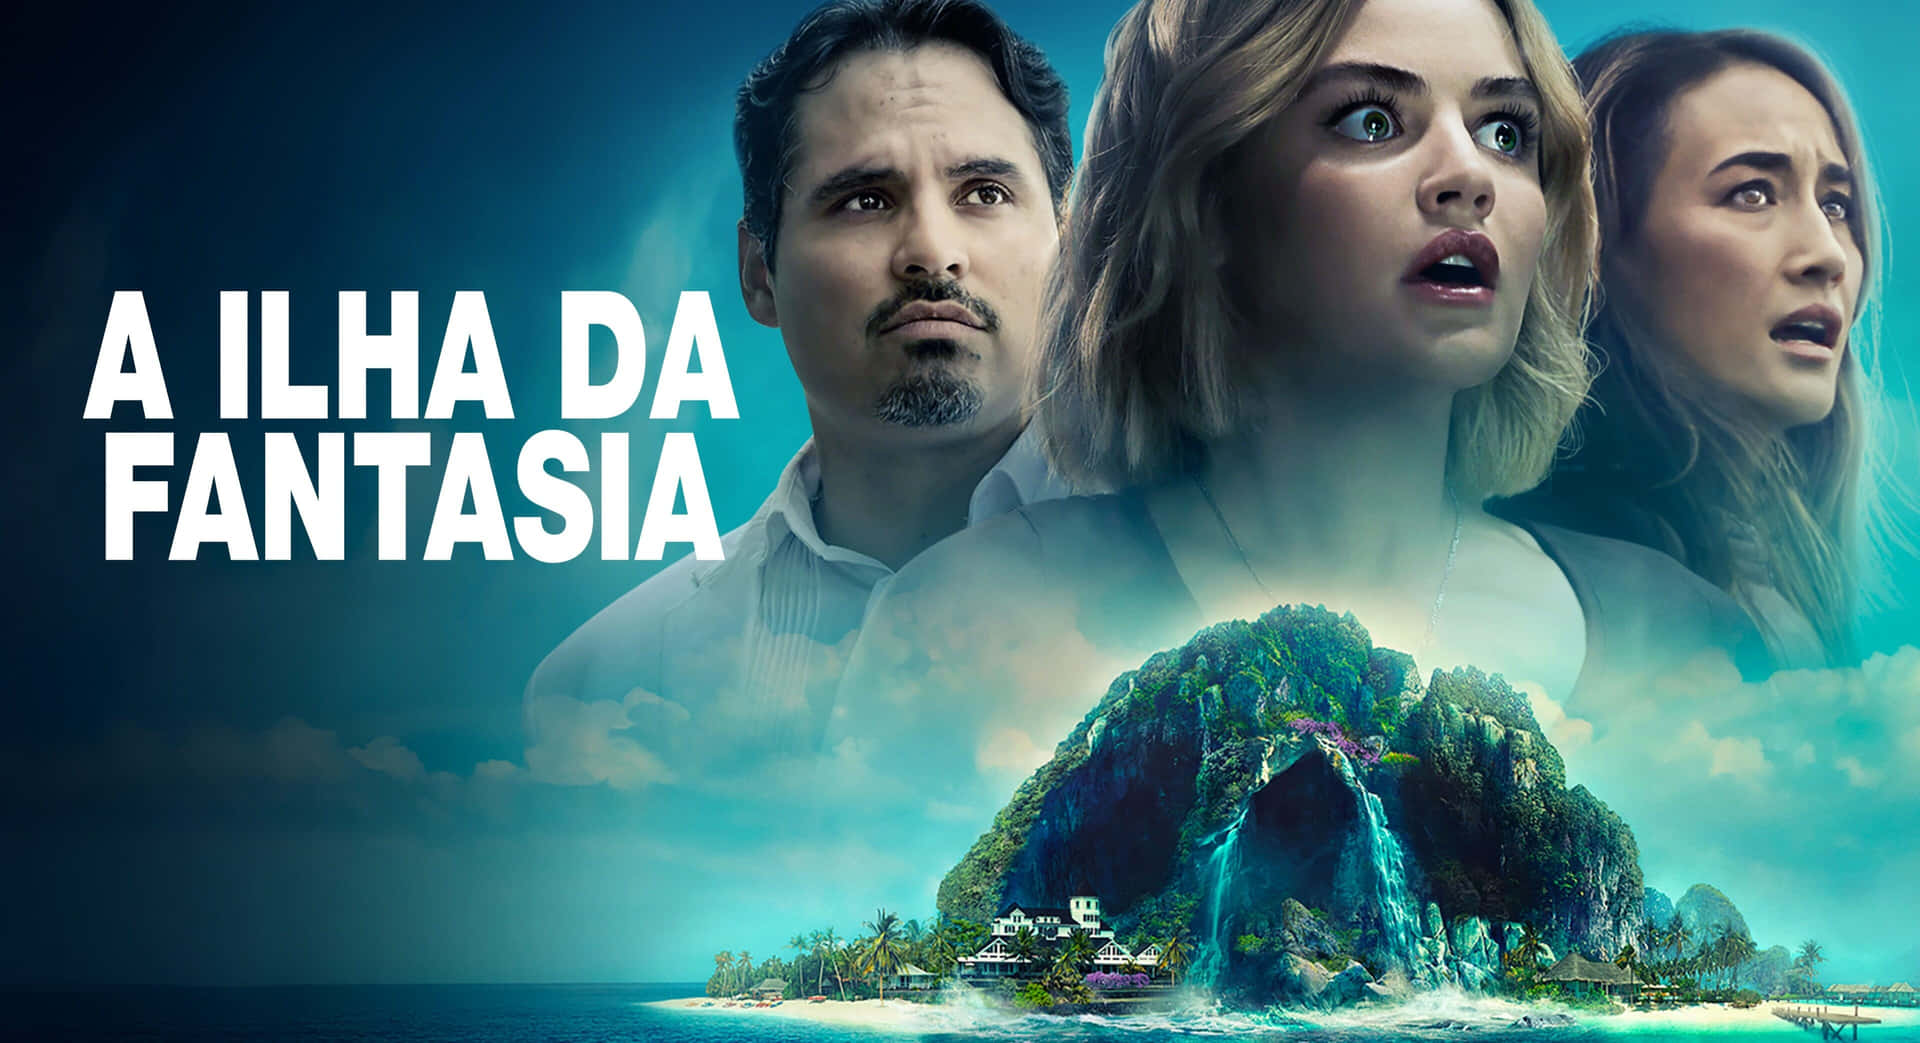 A Lha Da Fantasiaa Poster With Two People On The Island